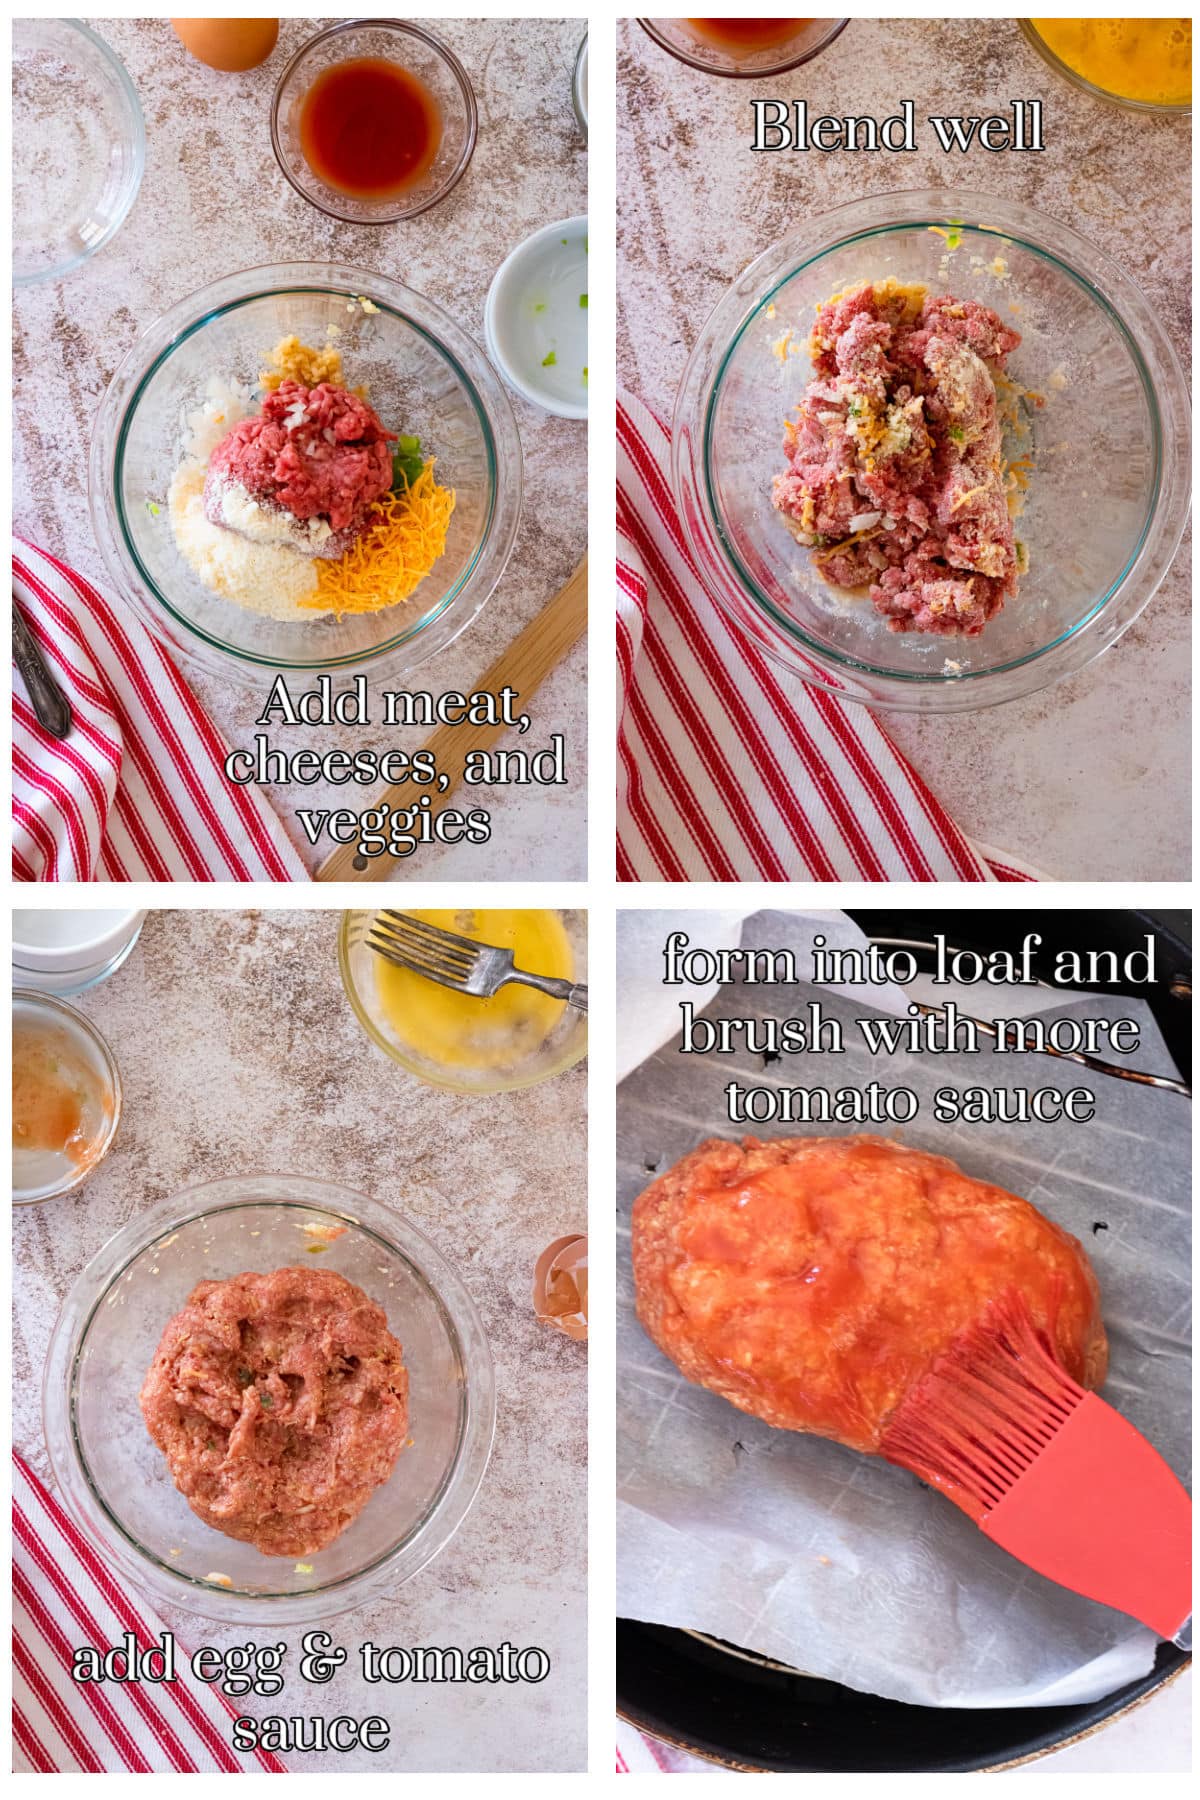 Step by step images for making the keto meatloaf recipe.